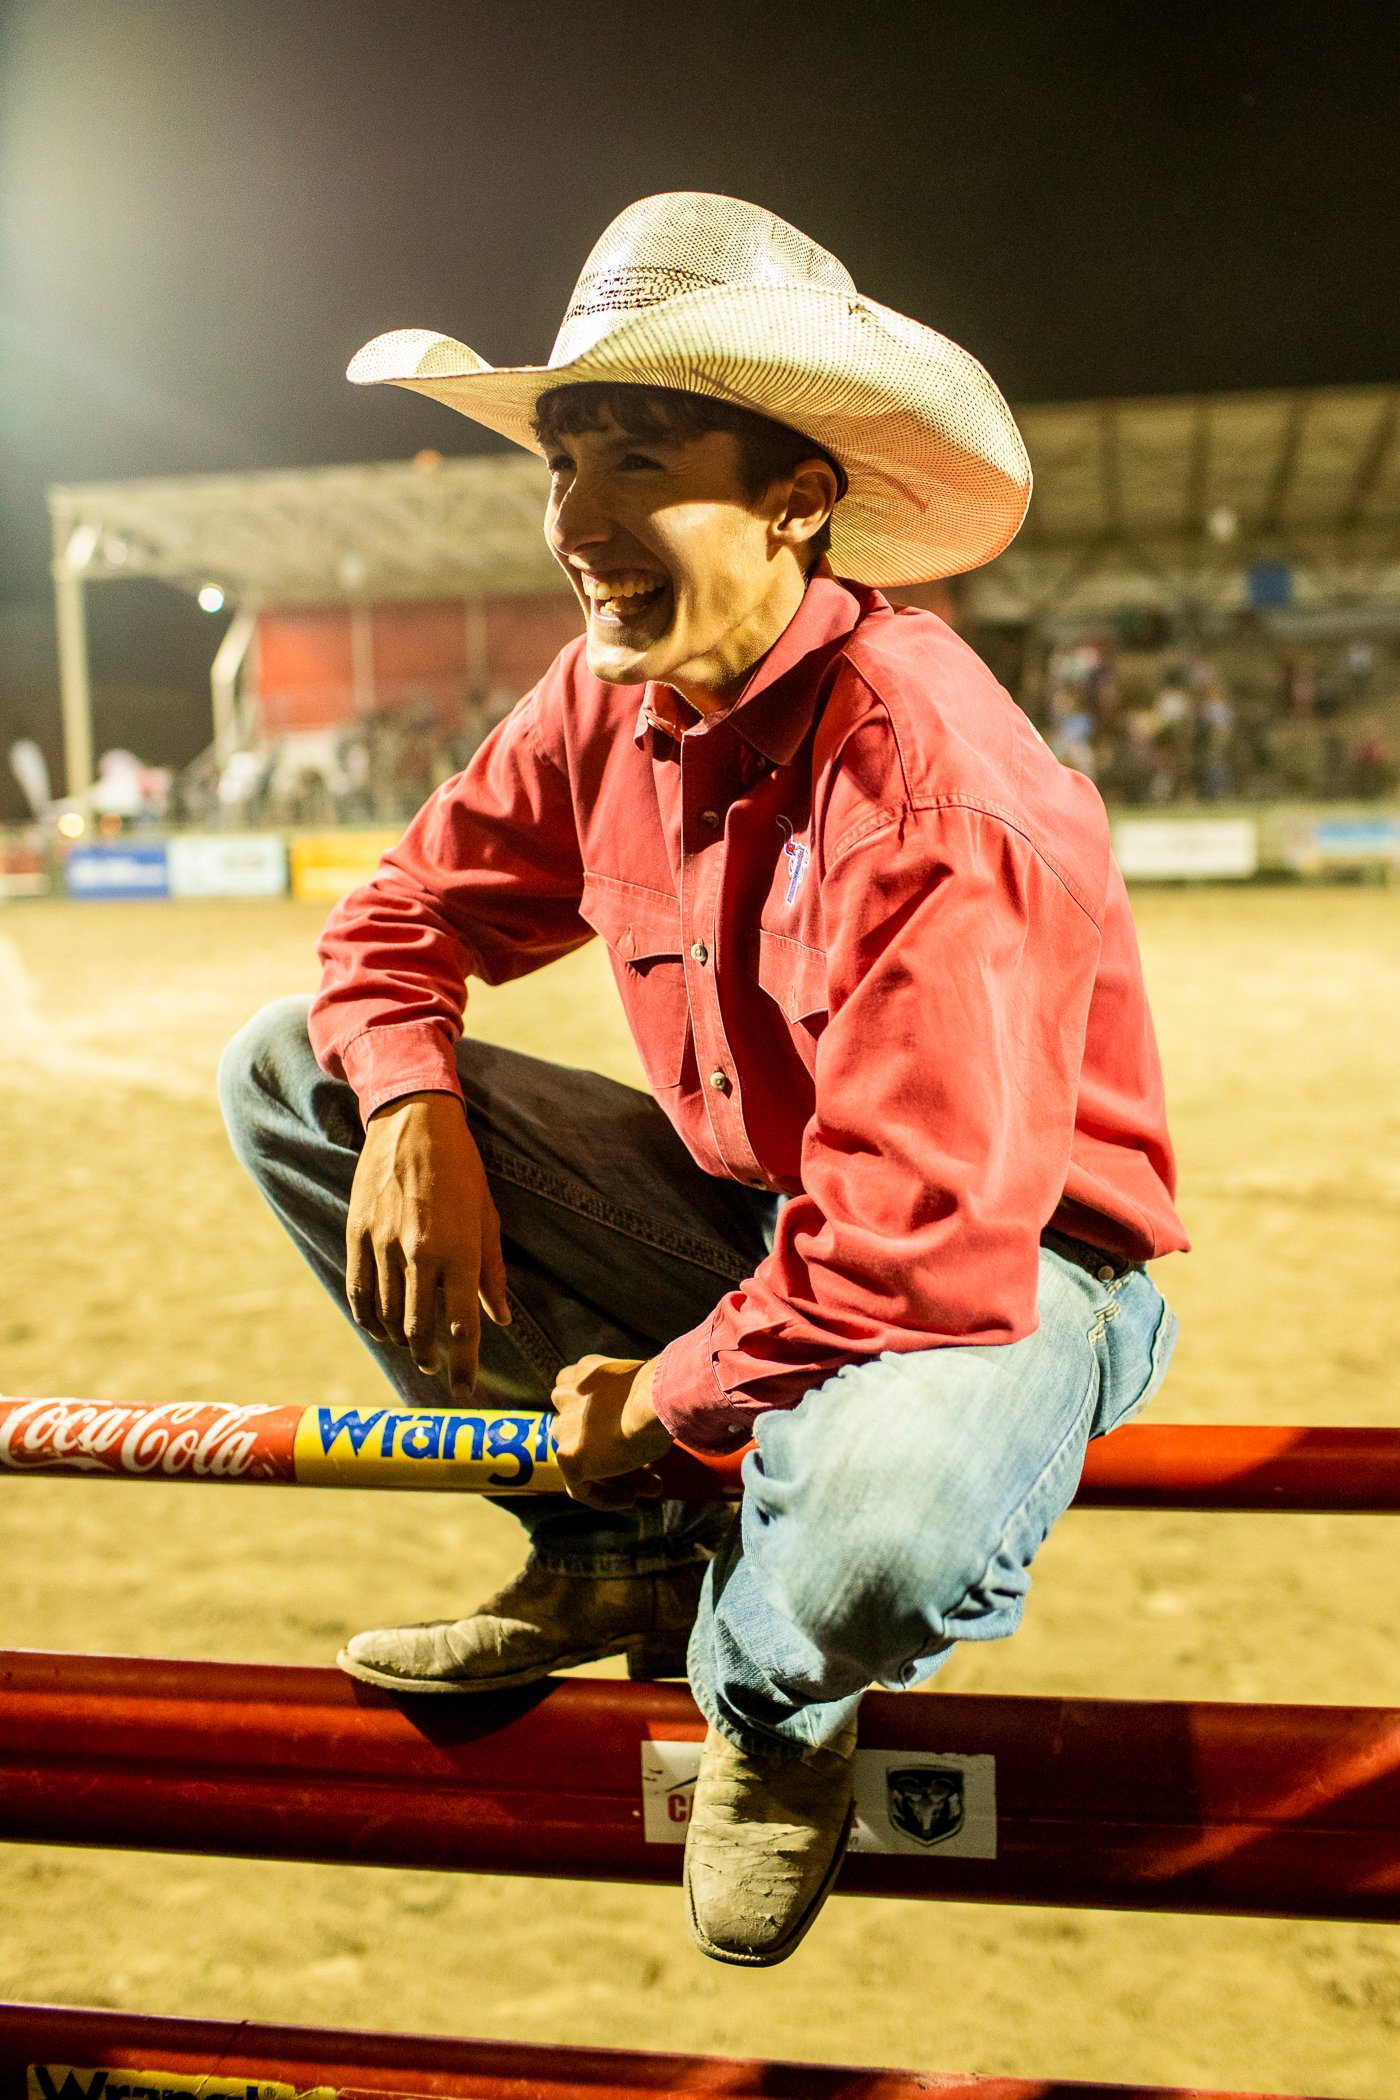 A teen in a cowboy hat perches on the rodeo gate in this portrait by Adam Hester